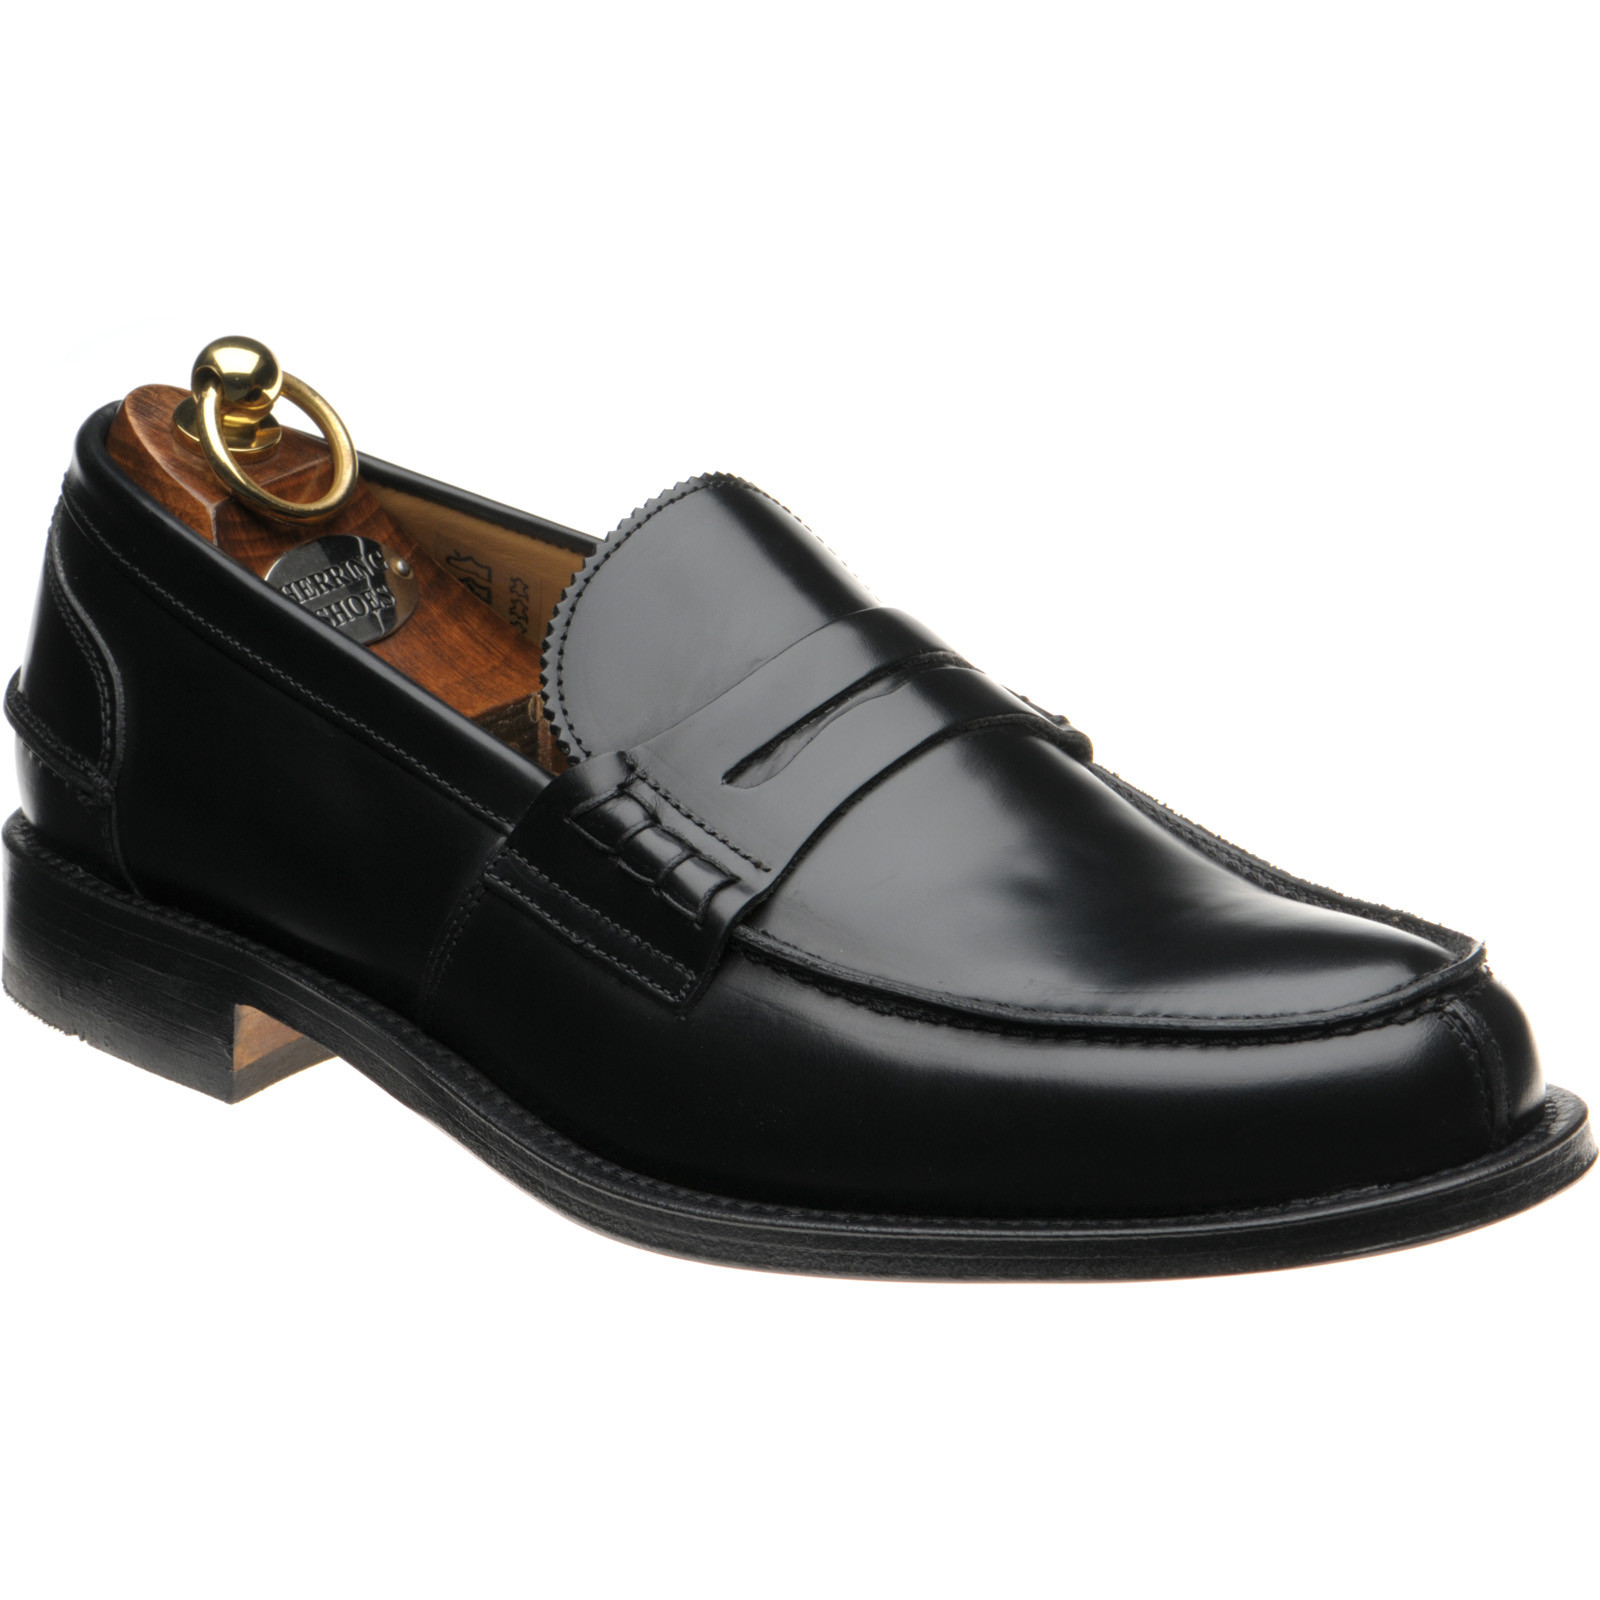 Herring shoes | Herring Classic | St George loafers in Black Polished ...